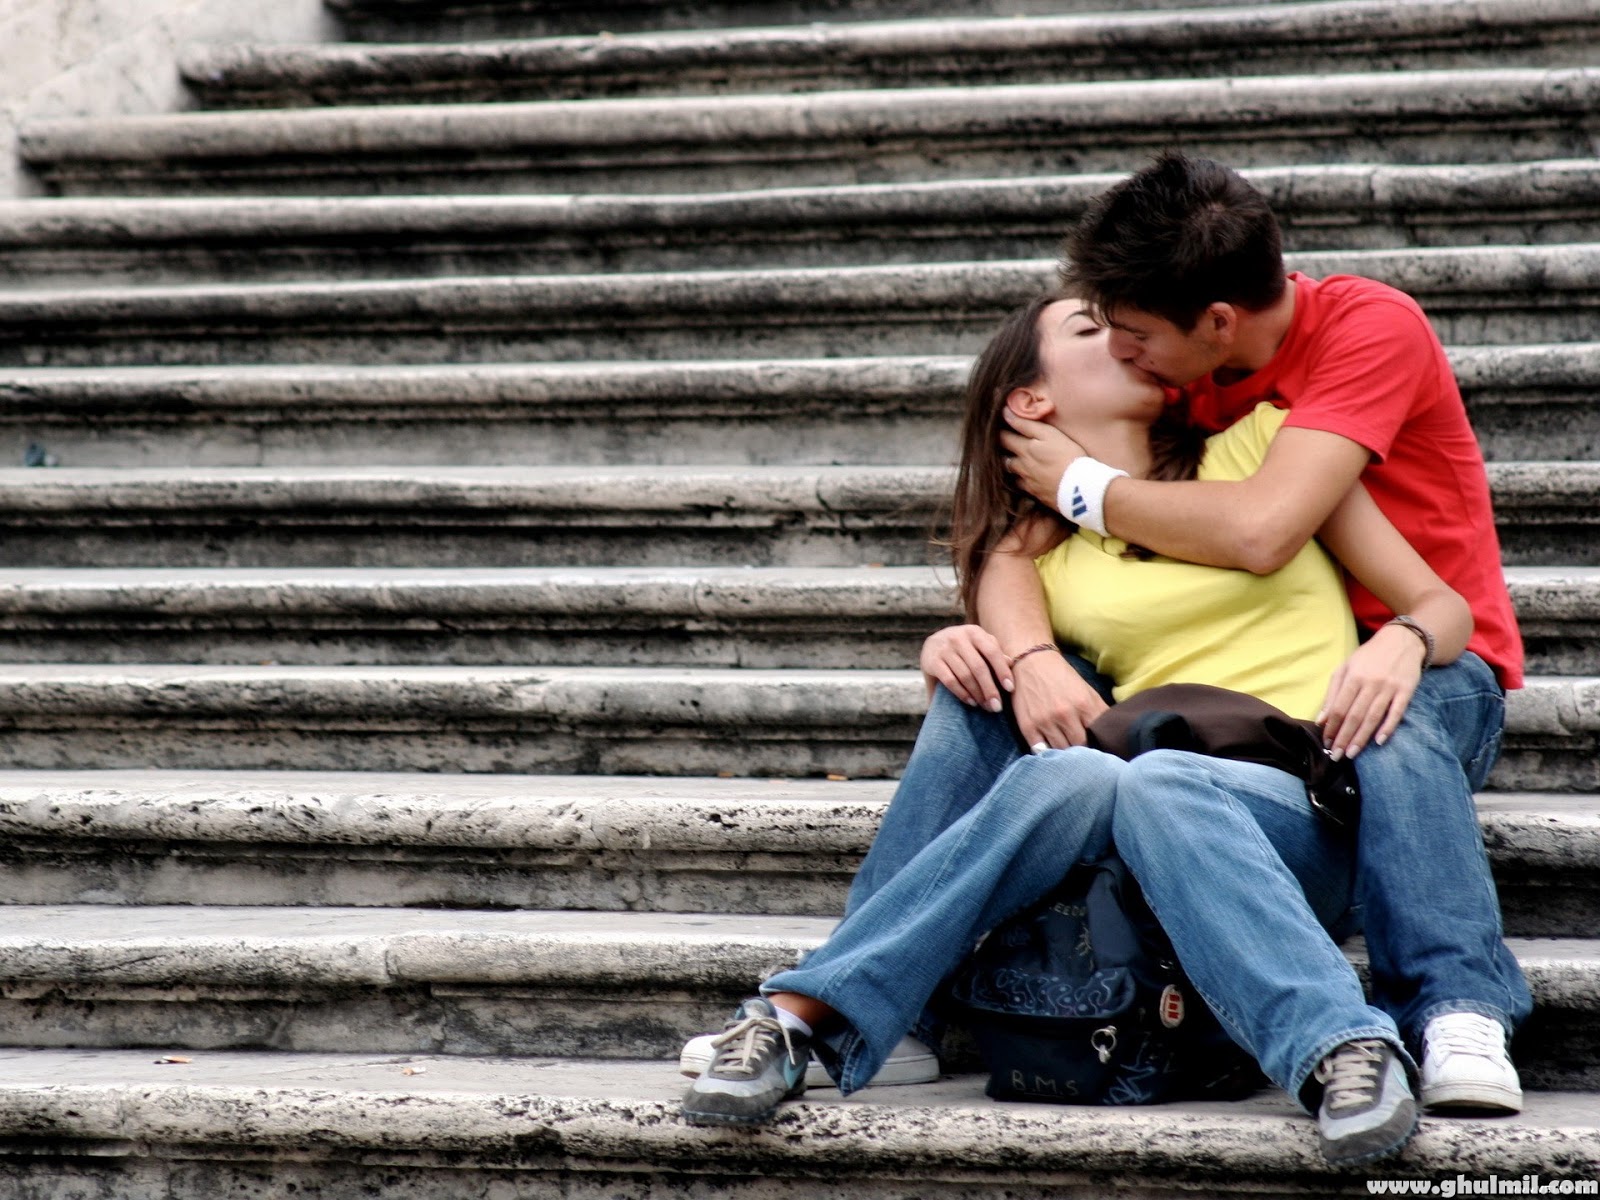 Valentines day Kiss HD wallpaper 2013 Picture and image